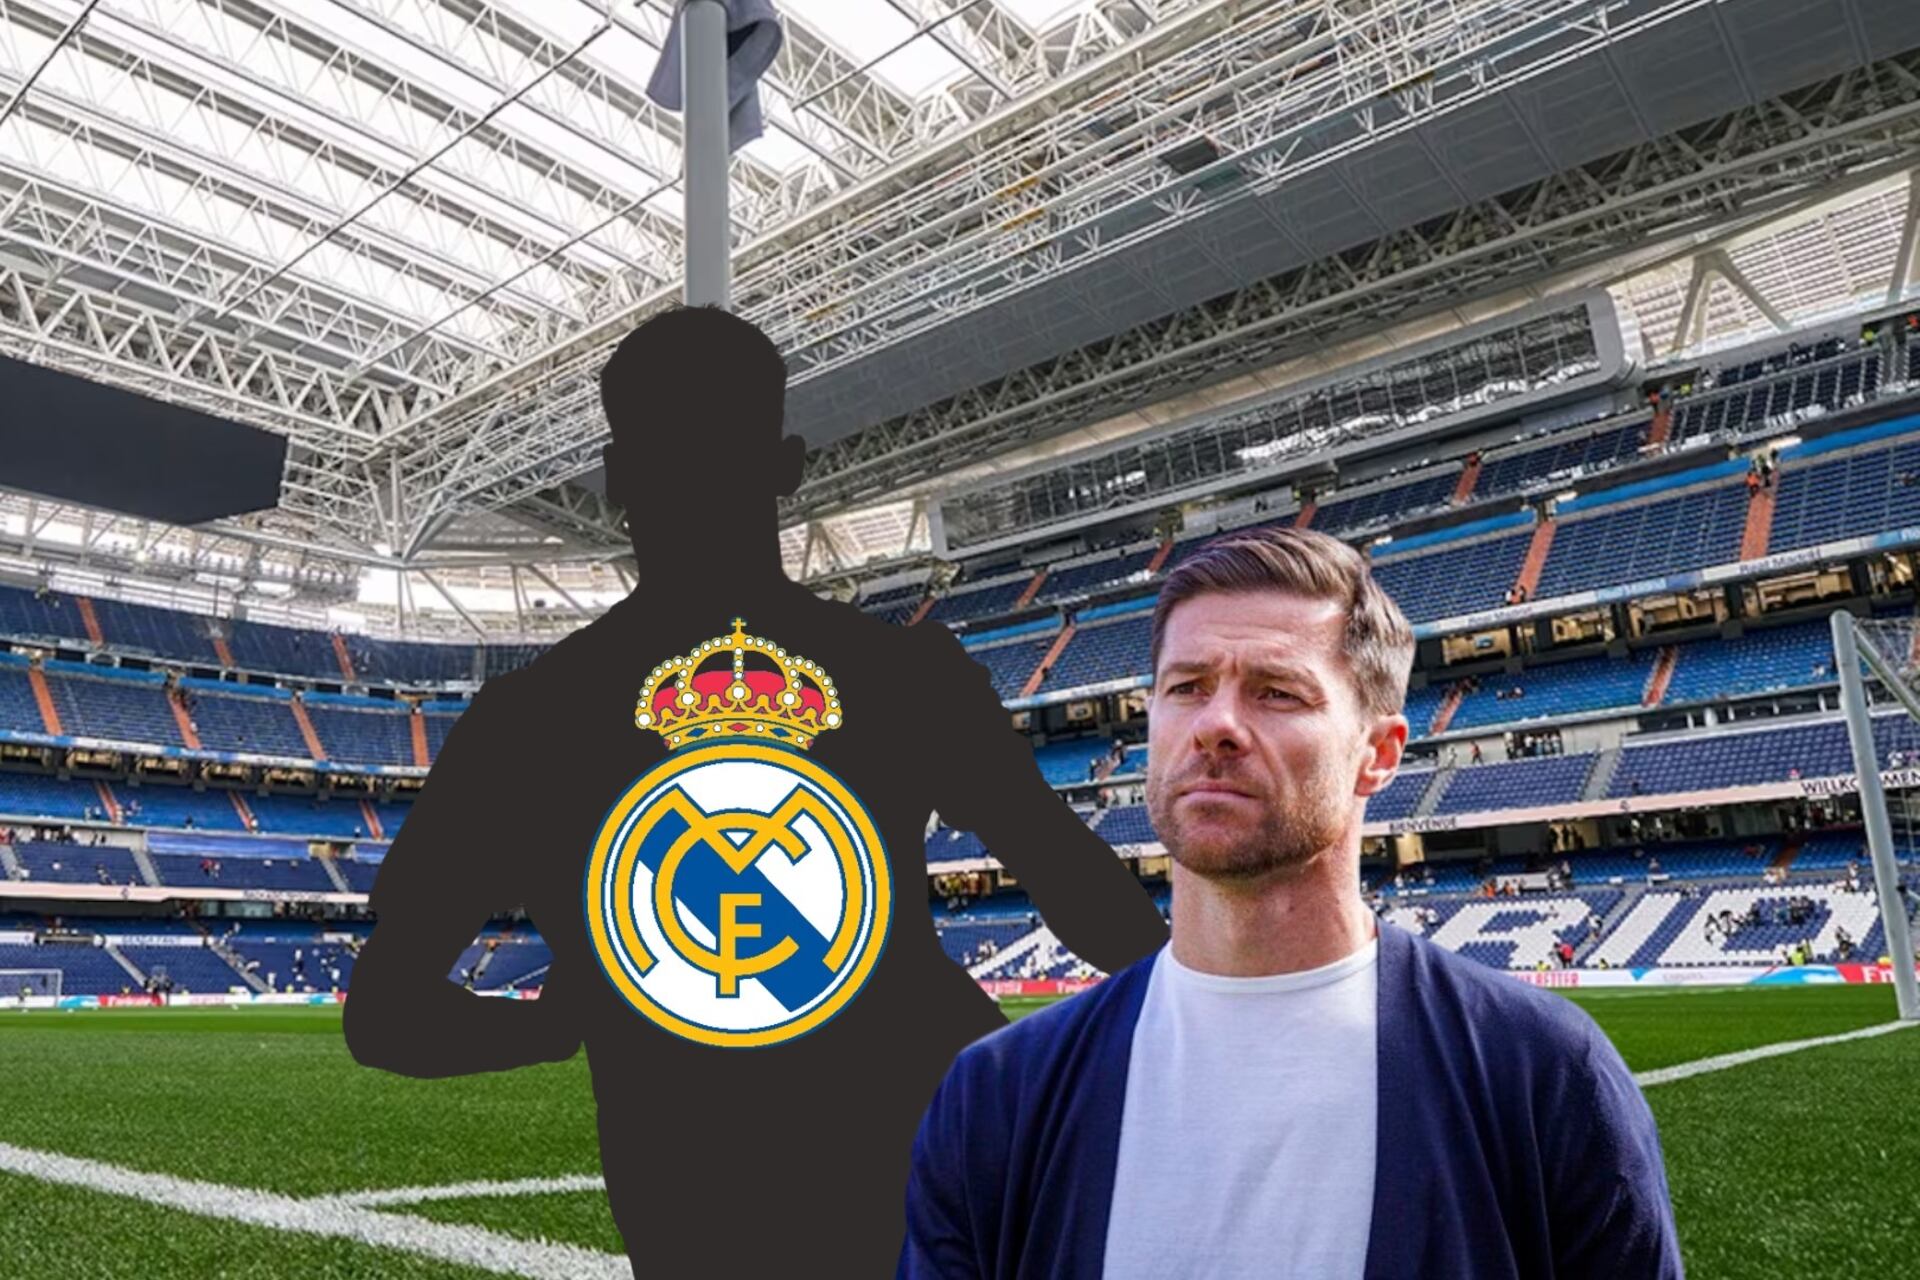 Real Madrid wants everything in the market, the star of Europe and Xabi Alonso that Madrid wants for $110M